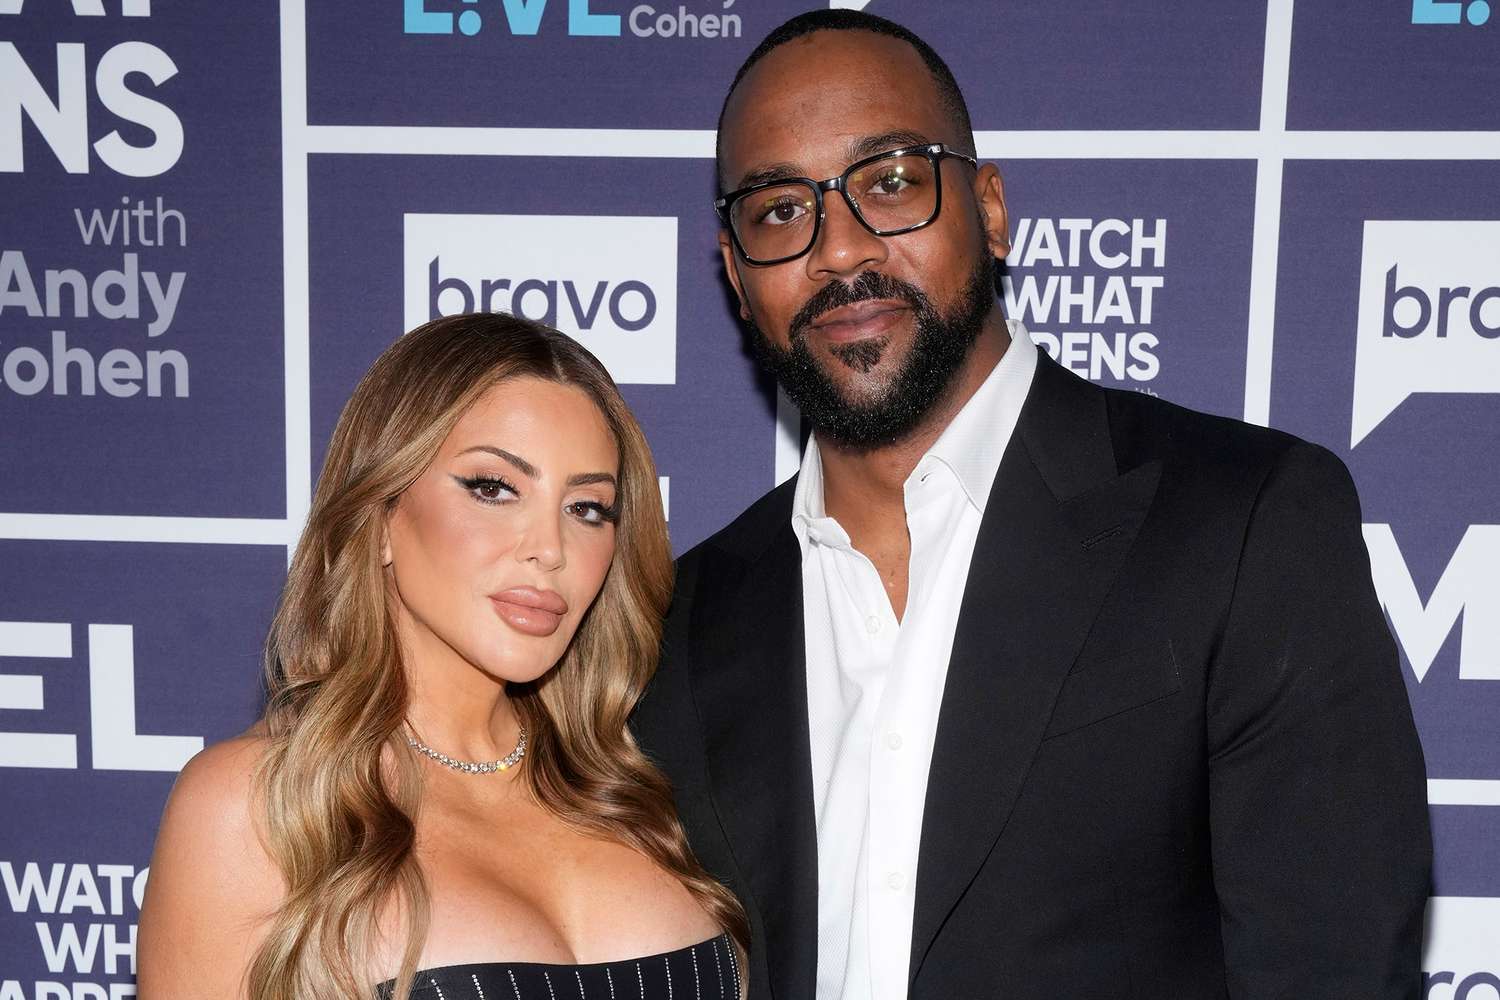 Larsa Pippen Confesses Her 1 Regret from Public Flameout with Marcus Jordan Before They Rekindled